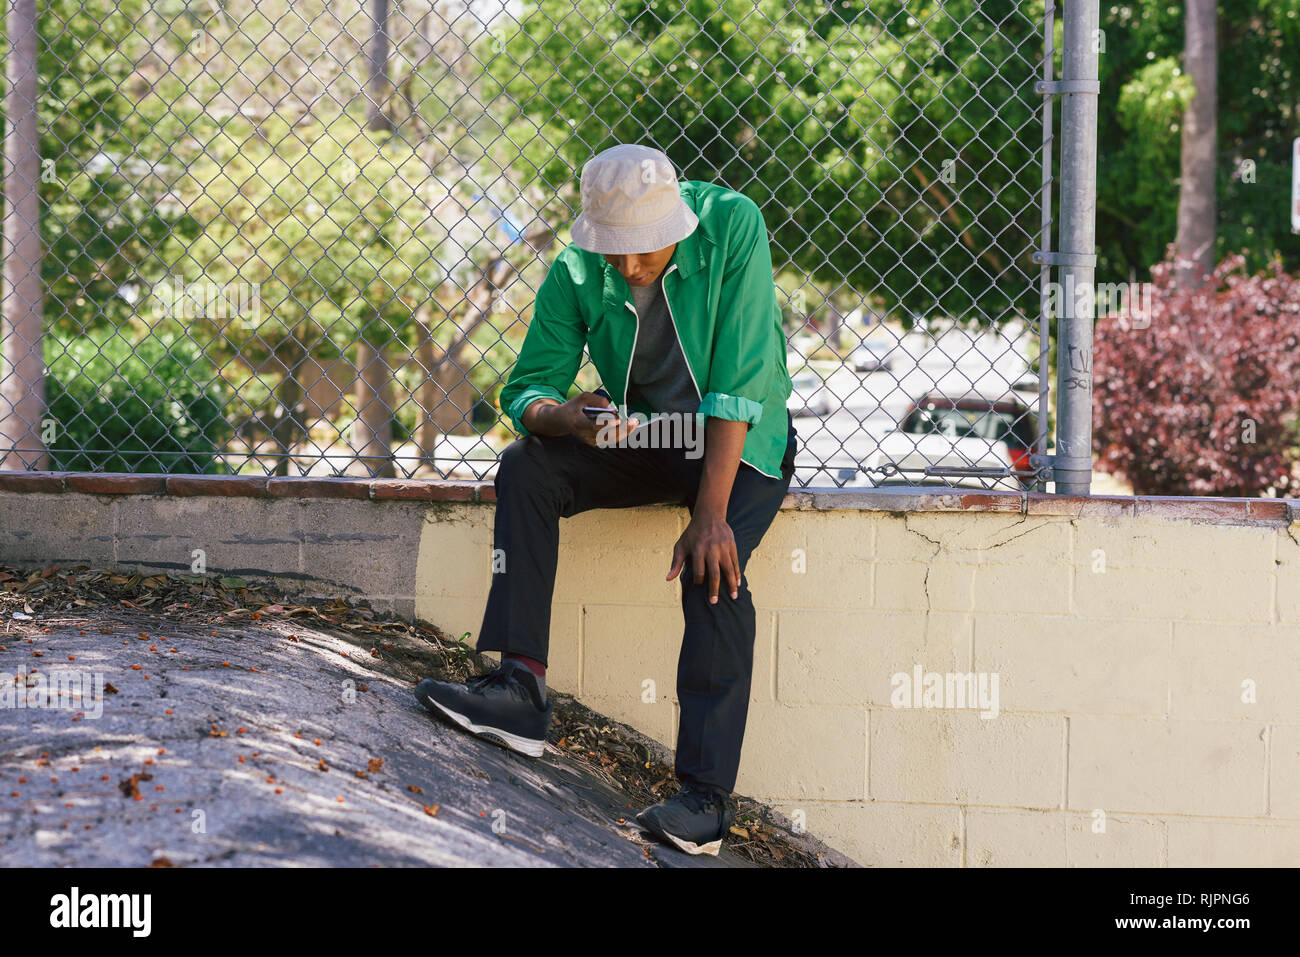 Young man looking at smartphone by park fence, Los Angeles, California, USA Stock Photo